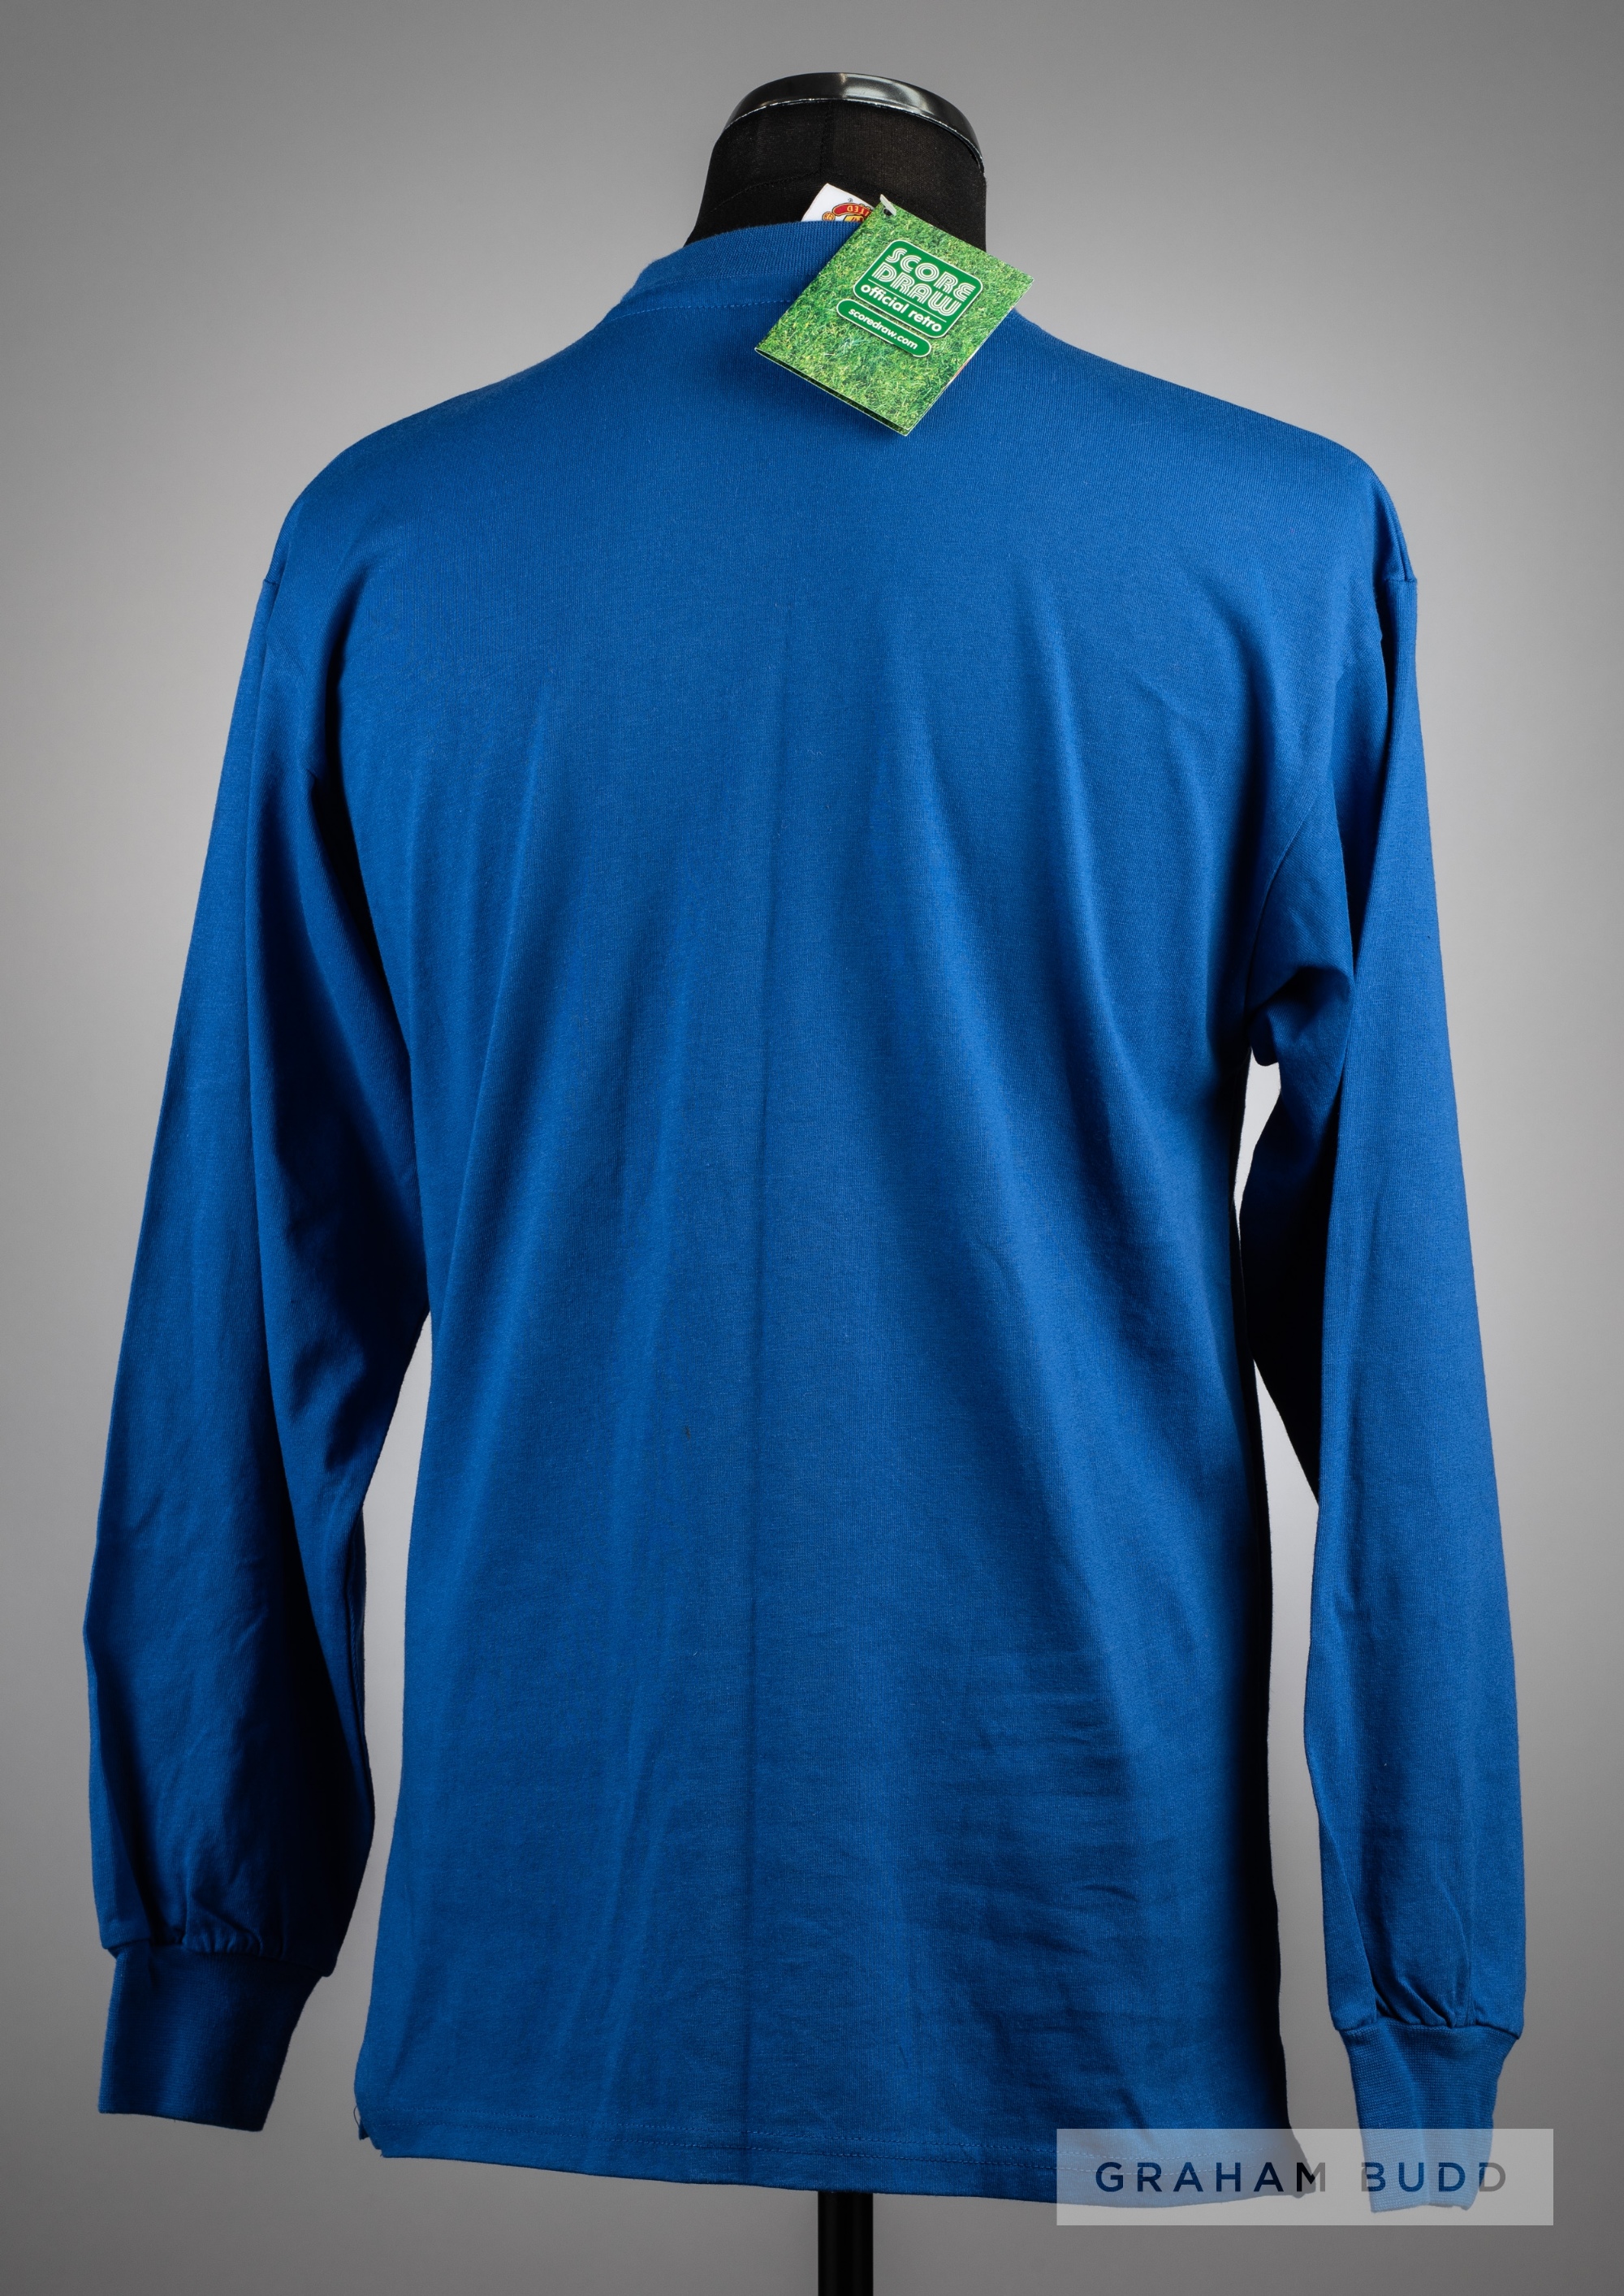 Manchester United Legends signed blue Wembley 1968 retro jersey,  long-sleeved, with embroidered - Image 2 of 2